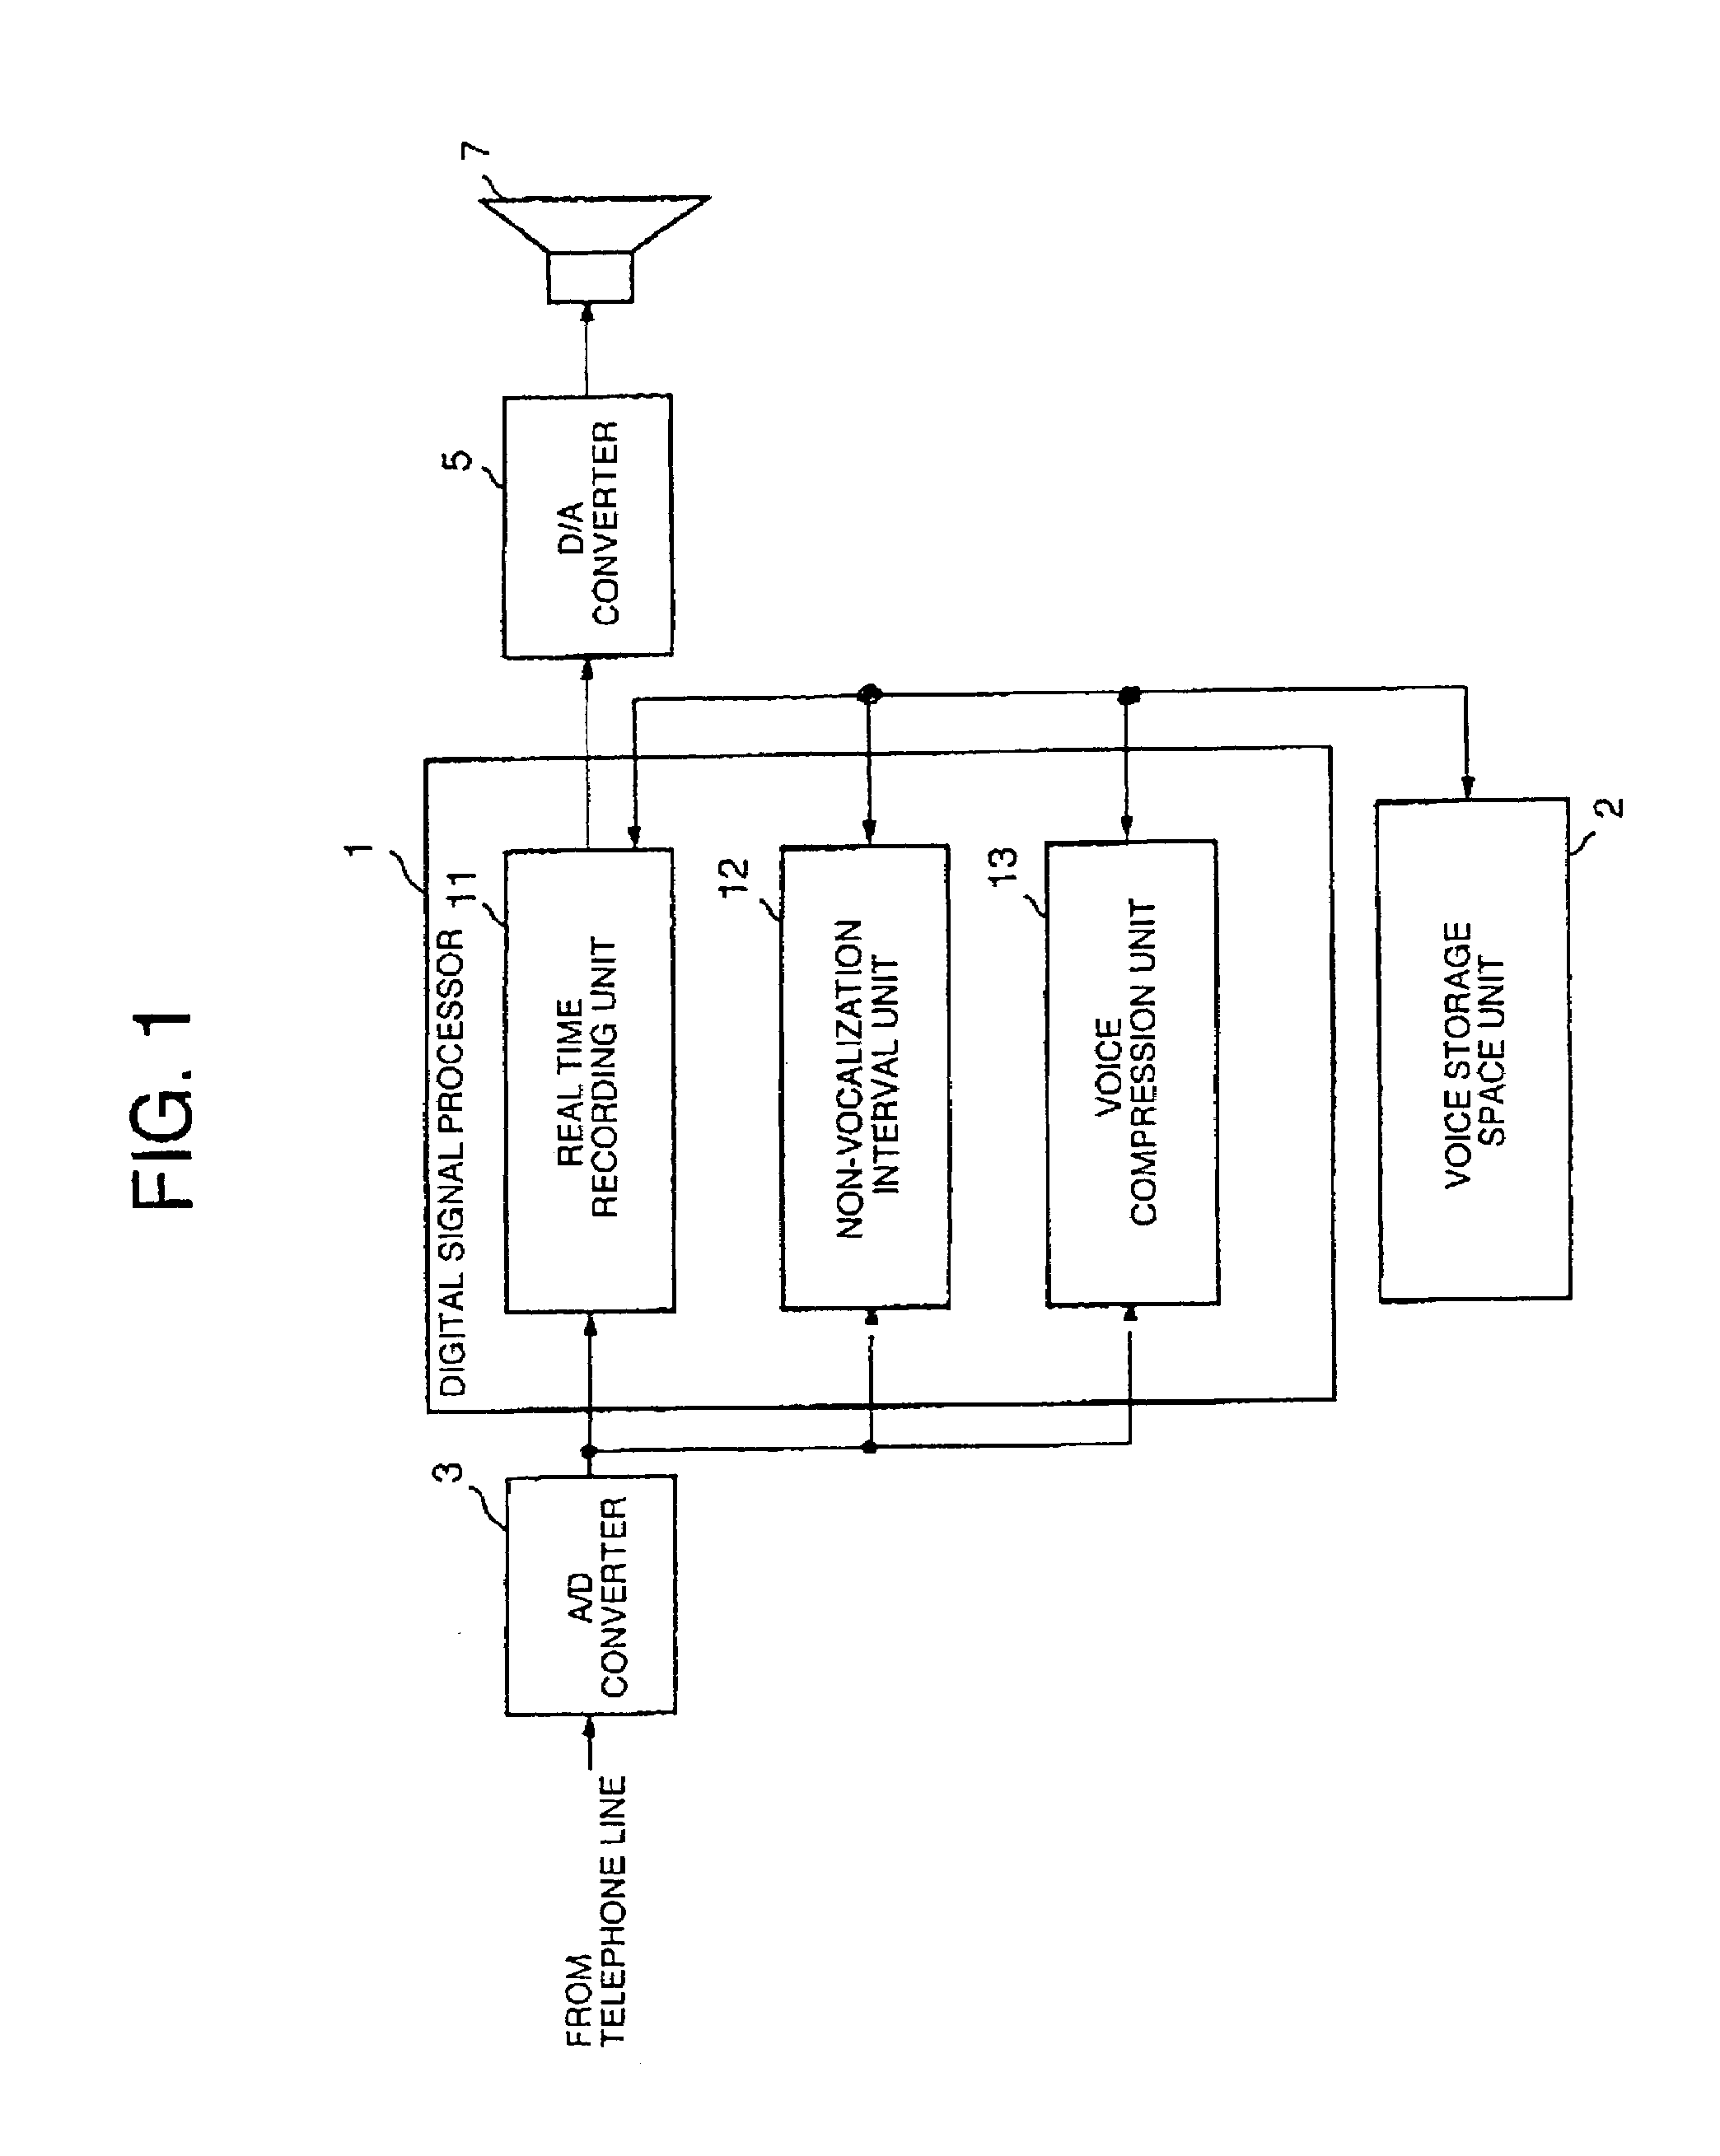 Voice storage device and voice coding device